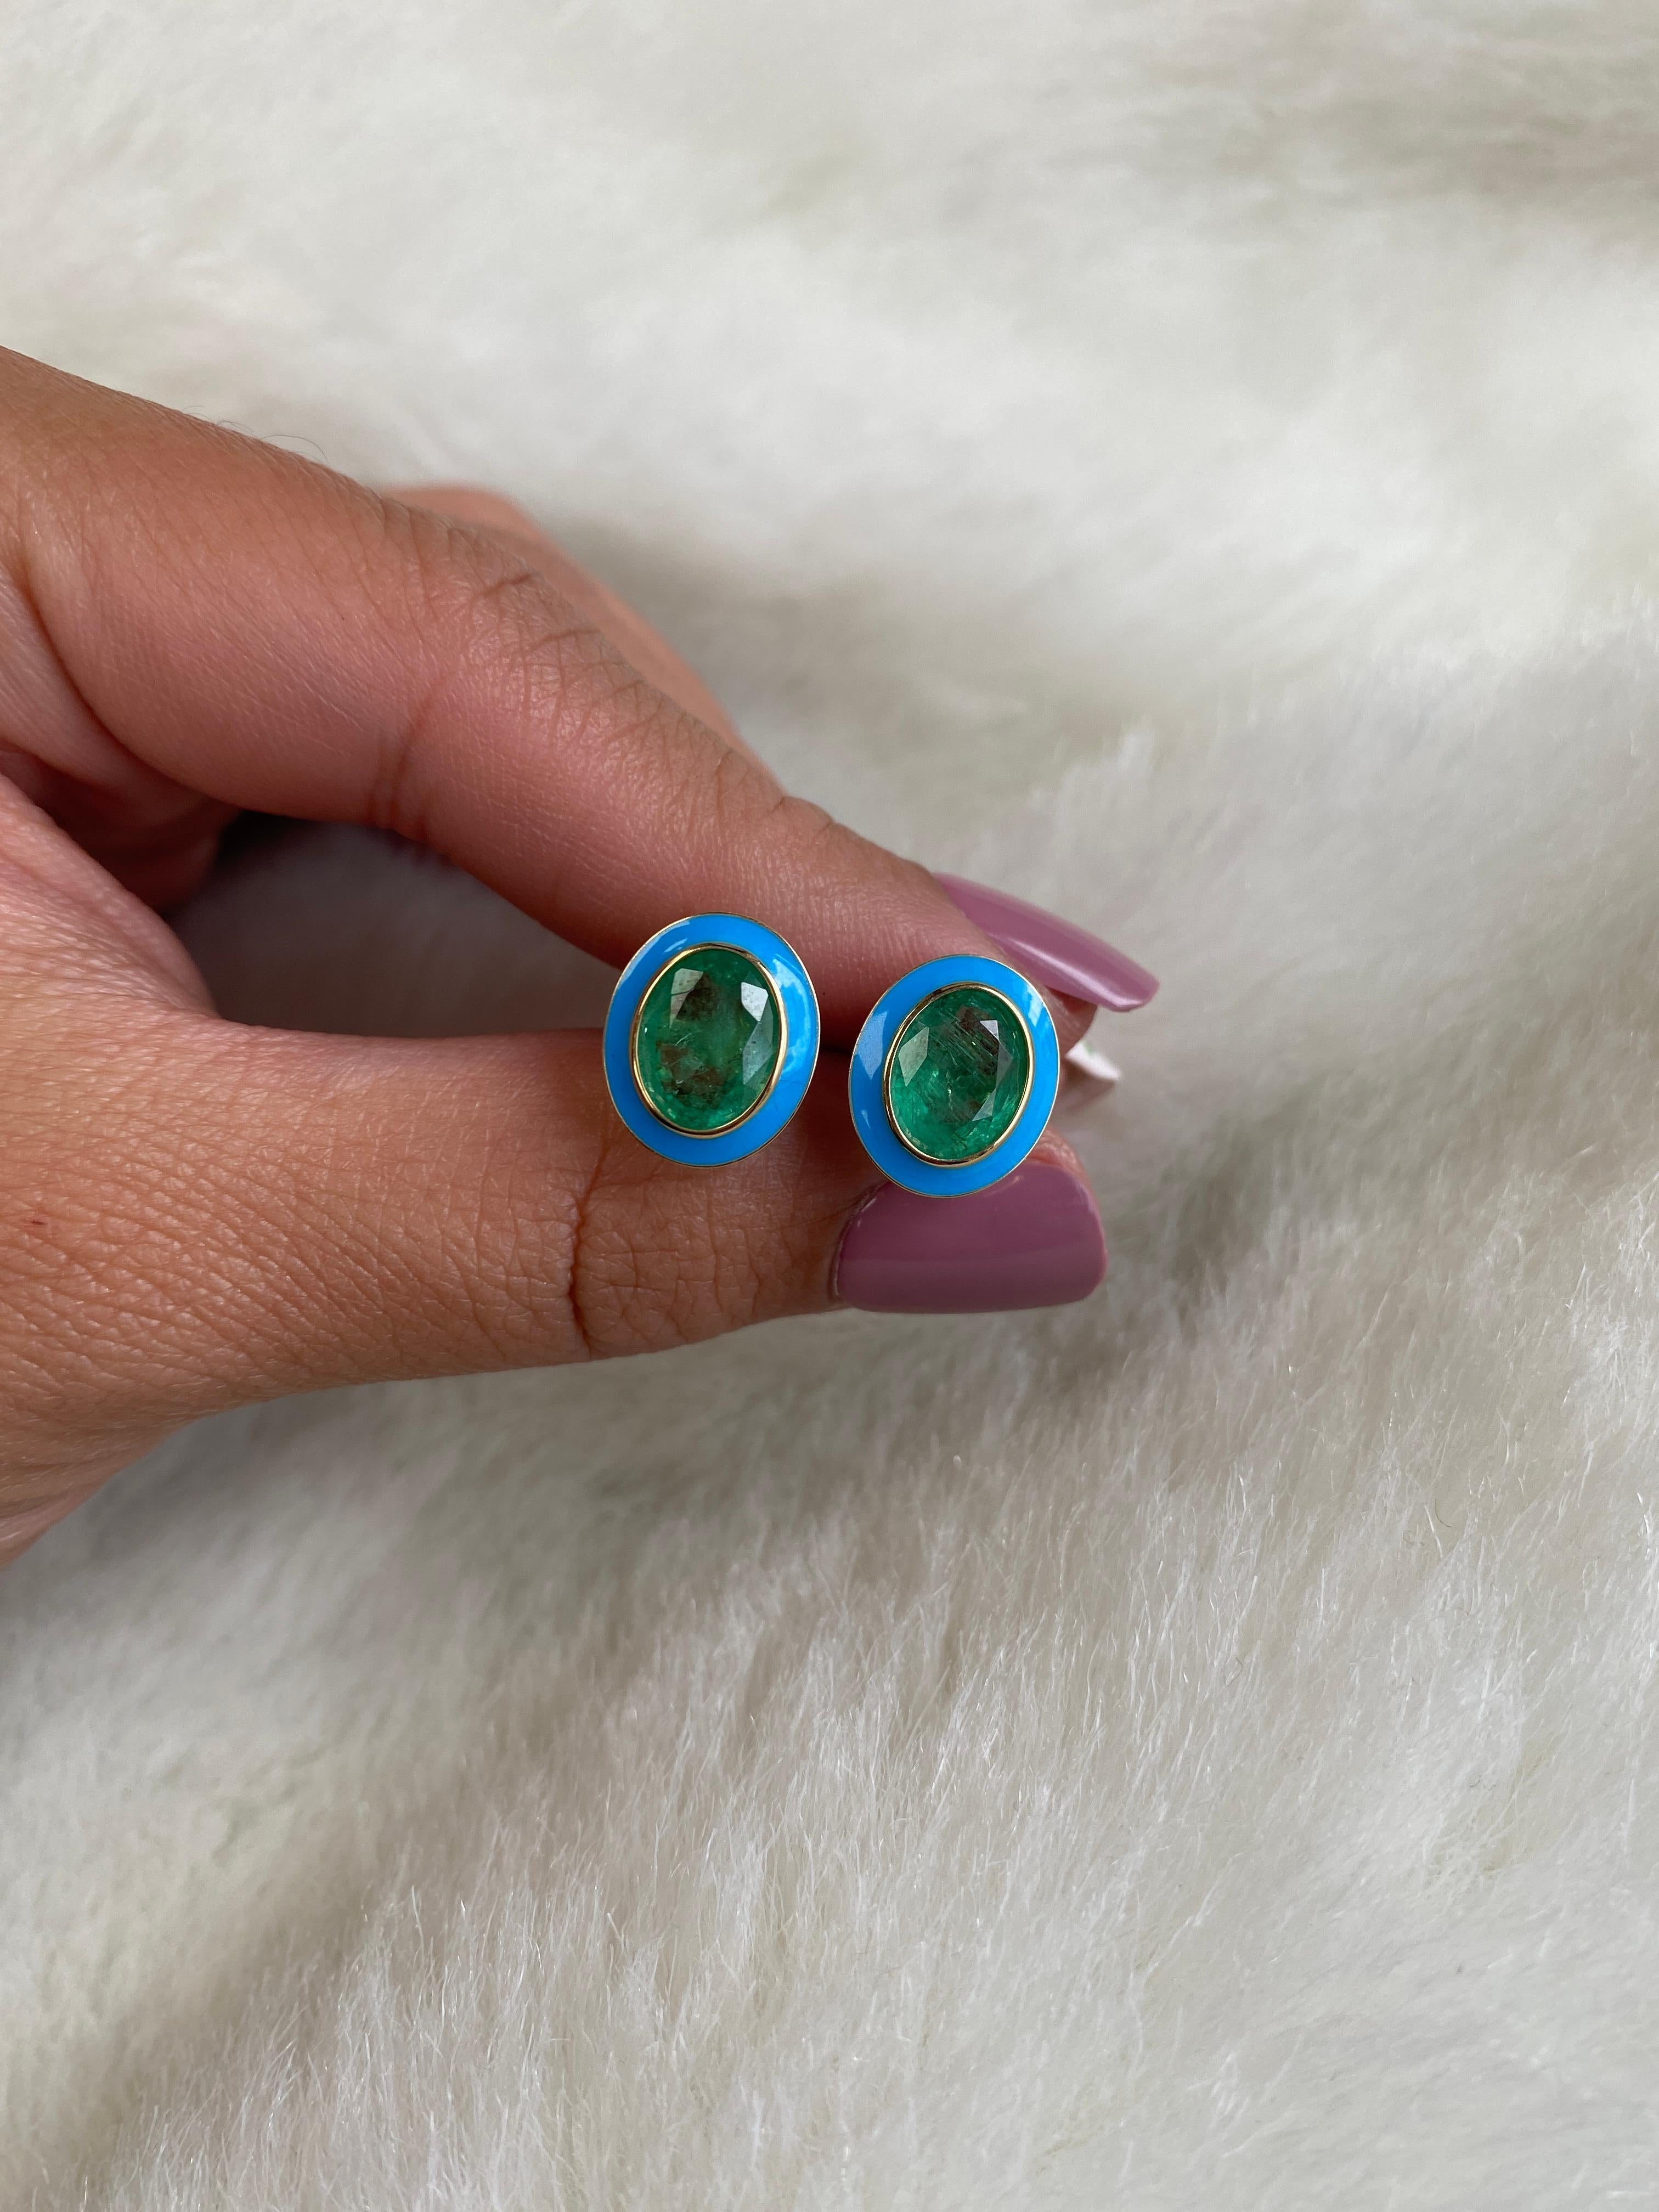 Emerald Oval Studs with Turquoise Enamel in 18K Yellow Gold, from 'Queen' Collection. The combination of enamel, and Emerald represents power, richness and passion of a true Queen. The feeling of luxury is what we’re aiming for, but at a price point